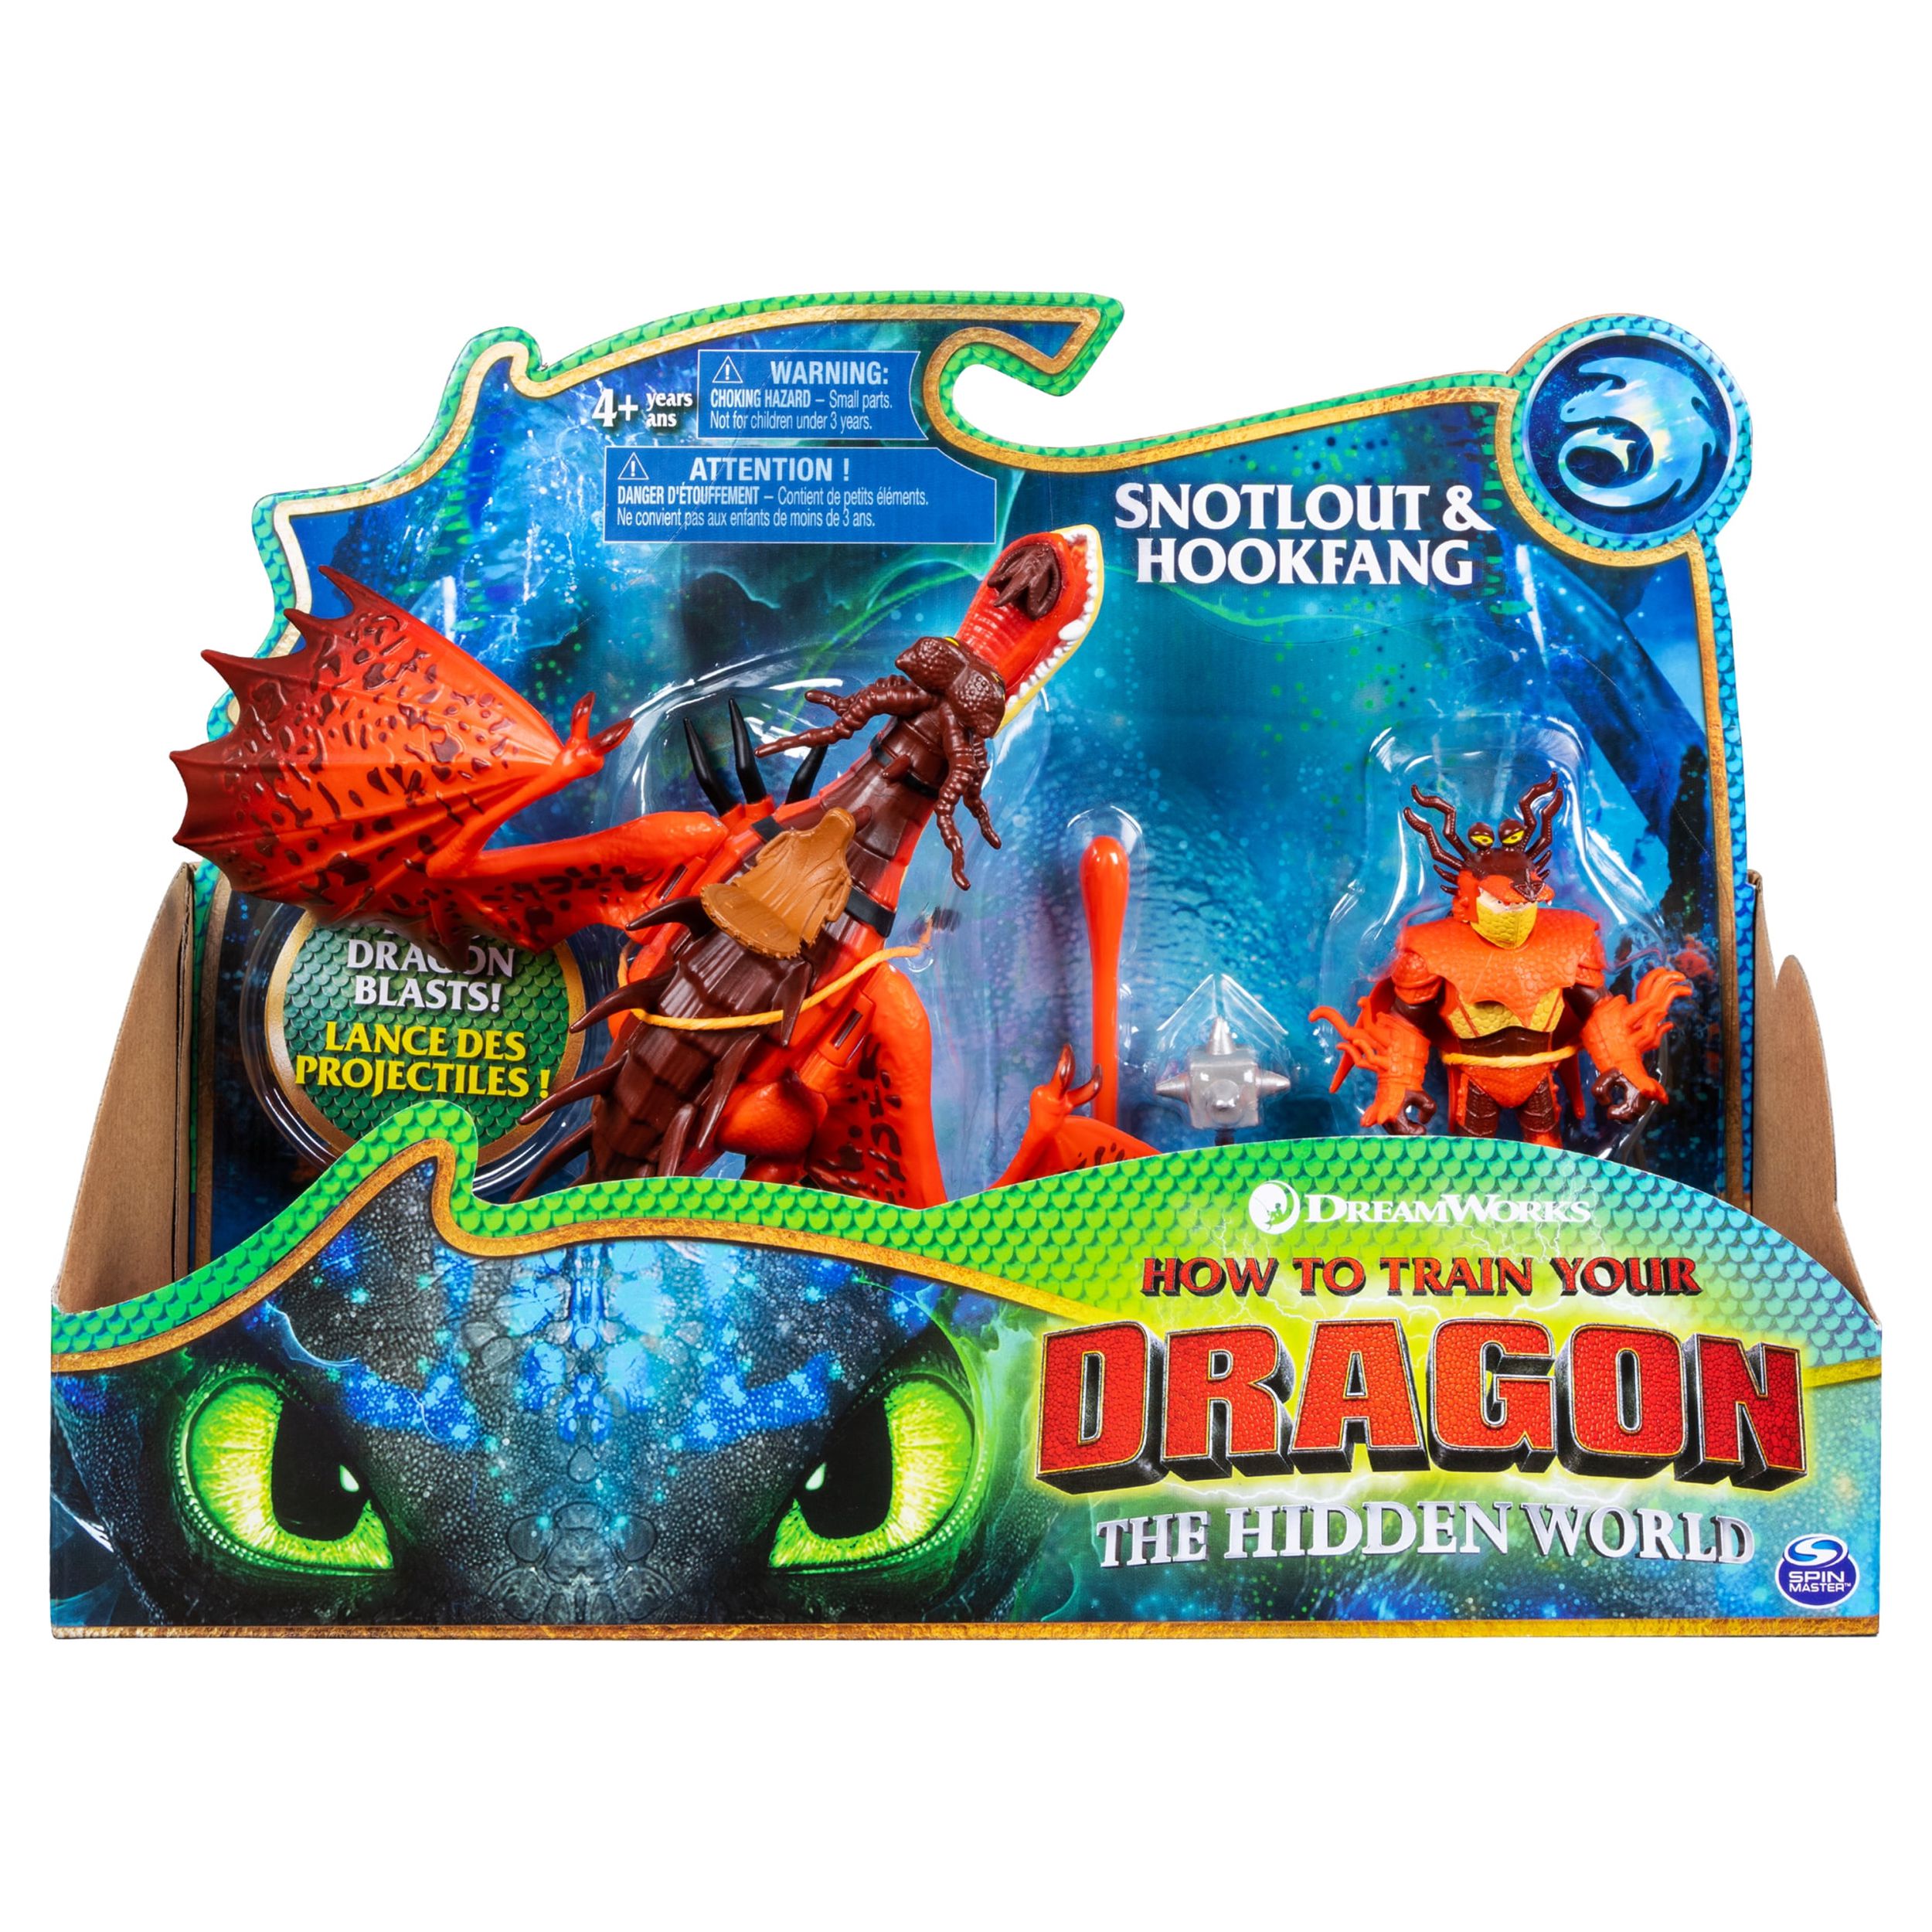 DreamWorks Dragons, Hookfang and Snotlout, Dragon with Armored Viking Figure, for Kids Aged 4 and Up - image 1 of 7